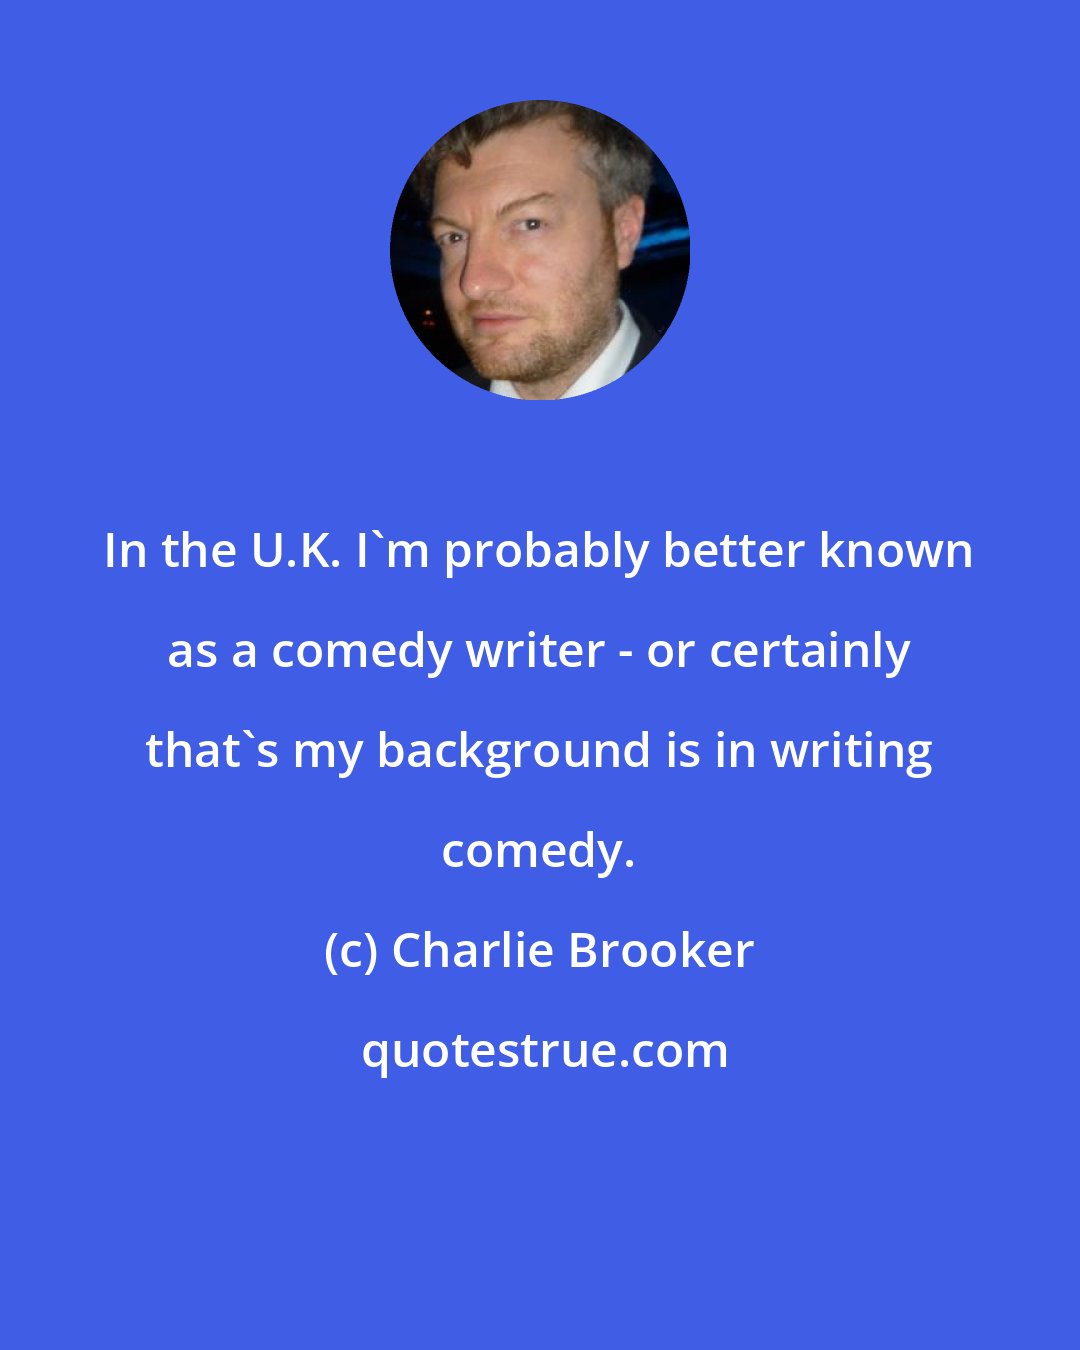 Charlie Brooker: In the U.K. I'm probably better known as a comedy writer - or certainly that's my background is in writing comedy.